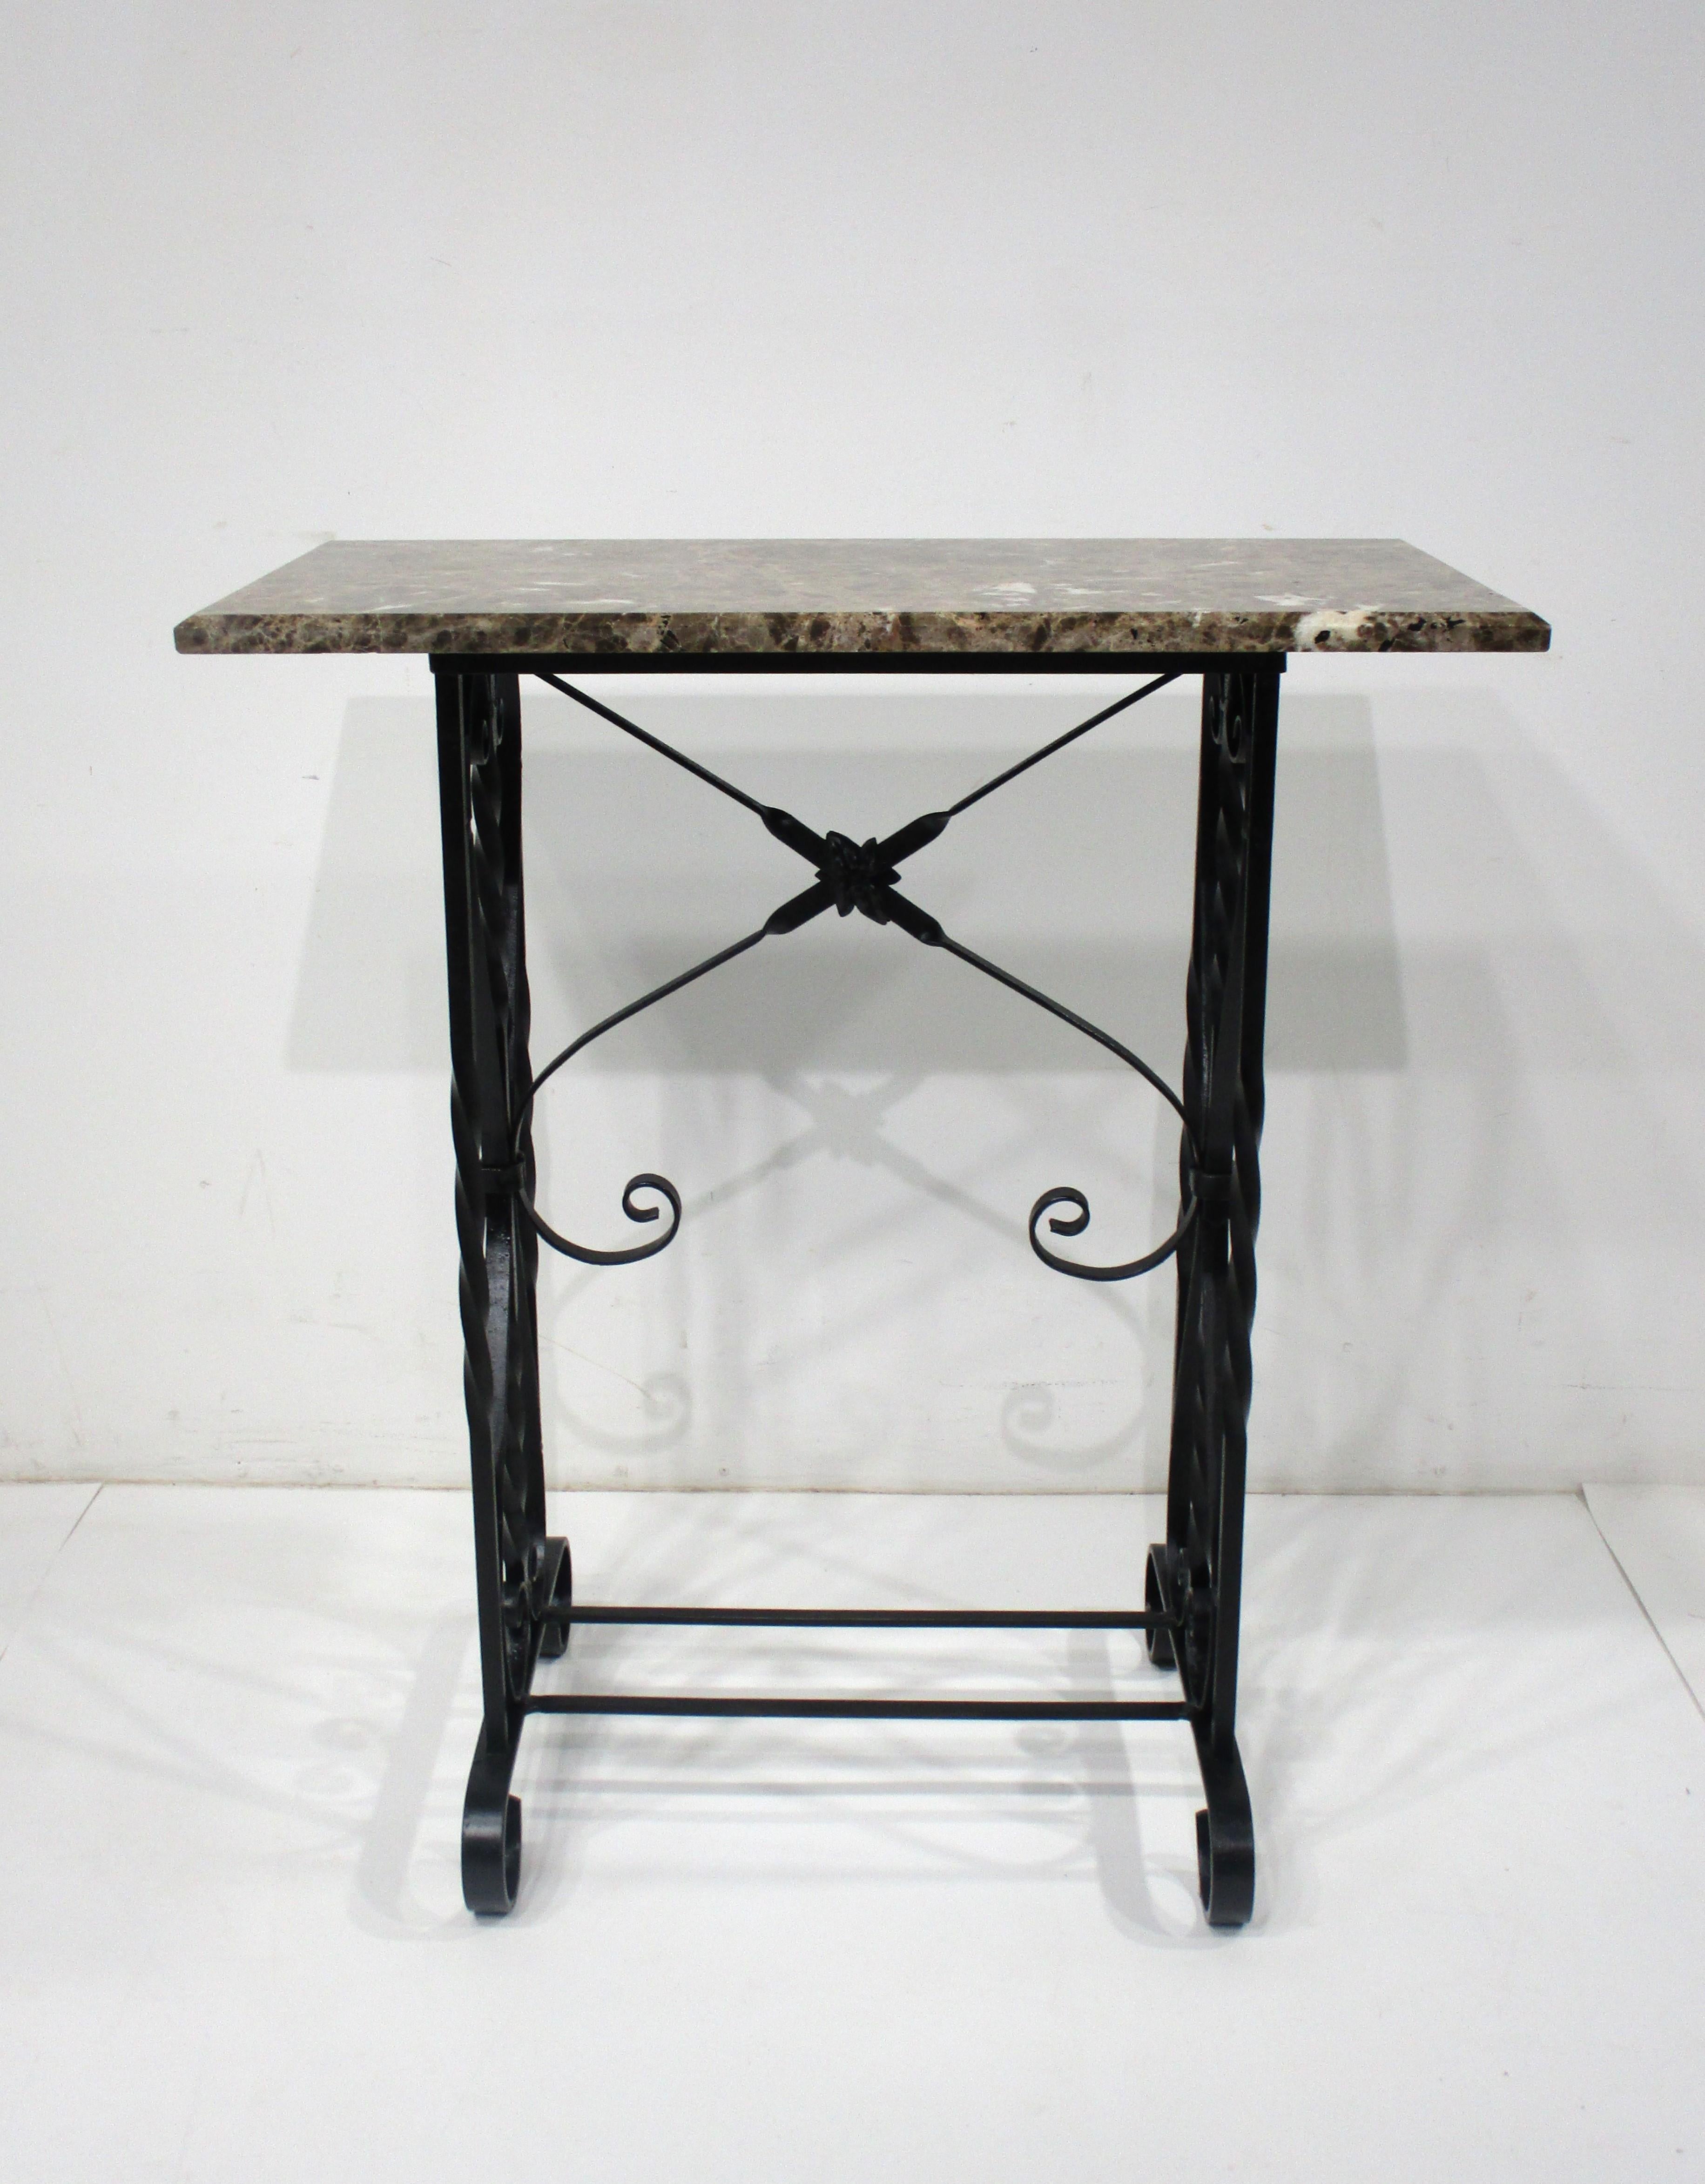 A very well crafted twisted and forged black iron based Art Deco styled console table with wonderful beveled marble top . The perfect piece for that hallway , under a mirror or in an entrance way . This two piece console table is functional and is a